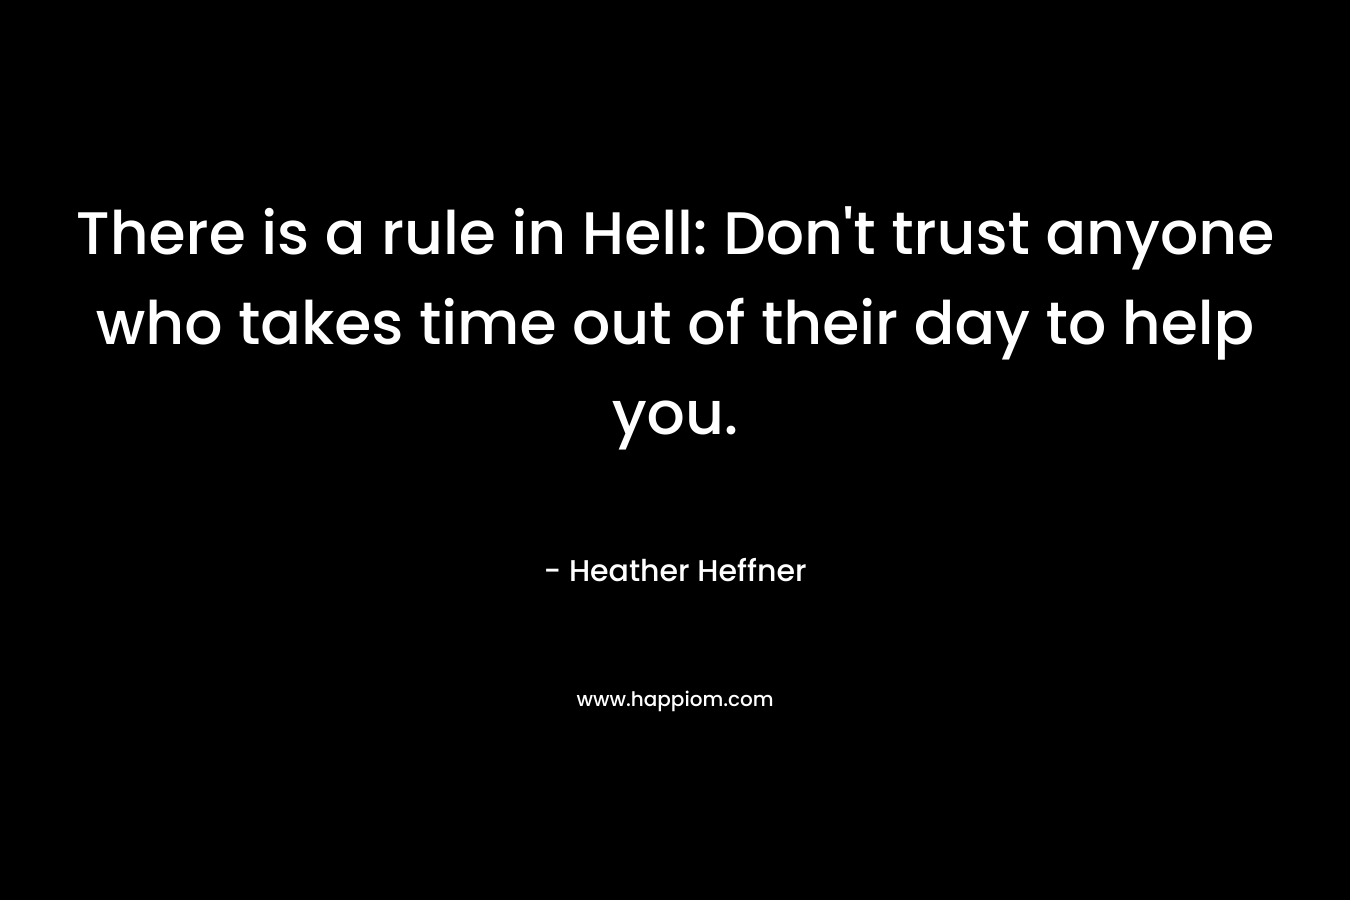 There is a rule in Hell: Don’t trust anyone who takes time out of their day to help you. – Heather Heffner